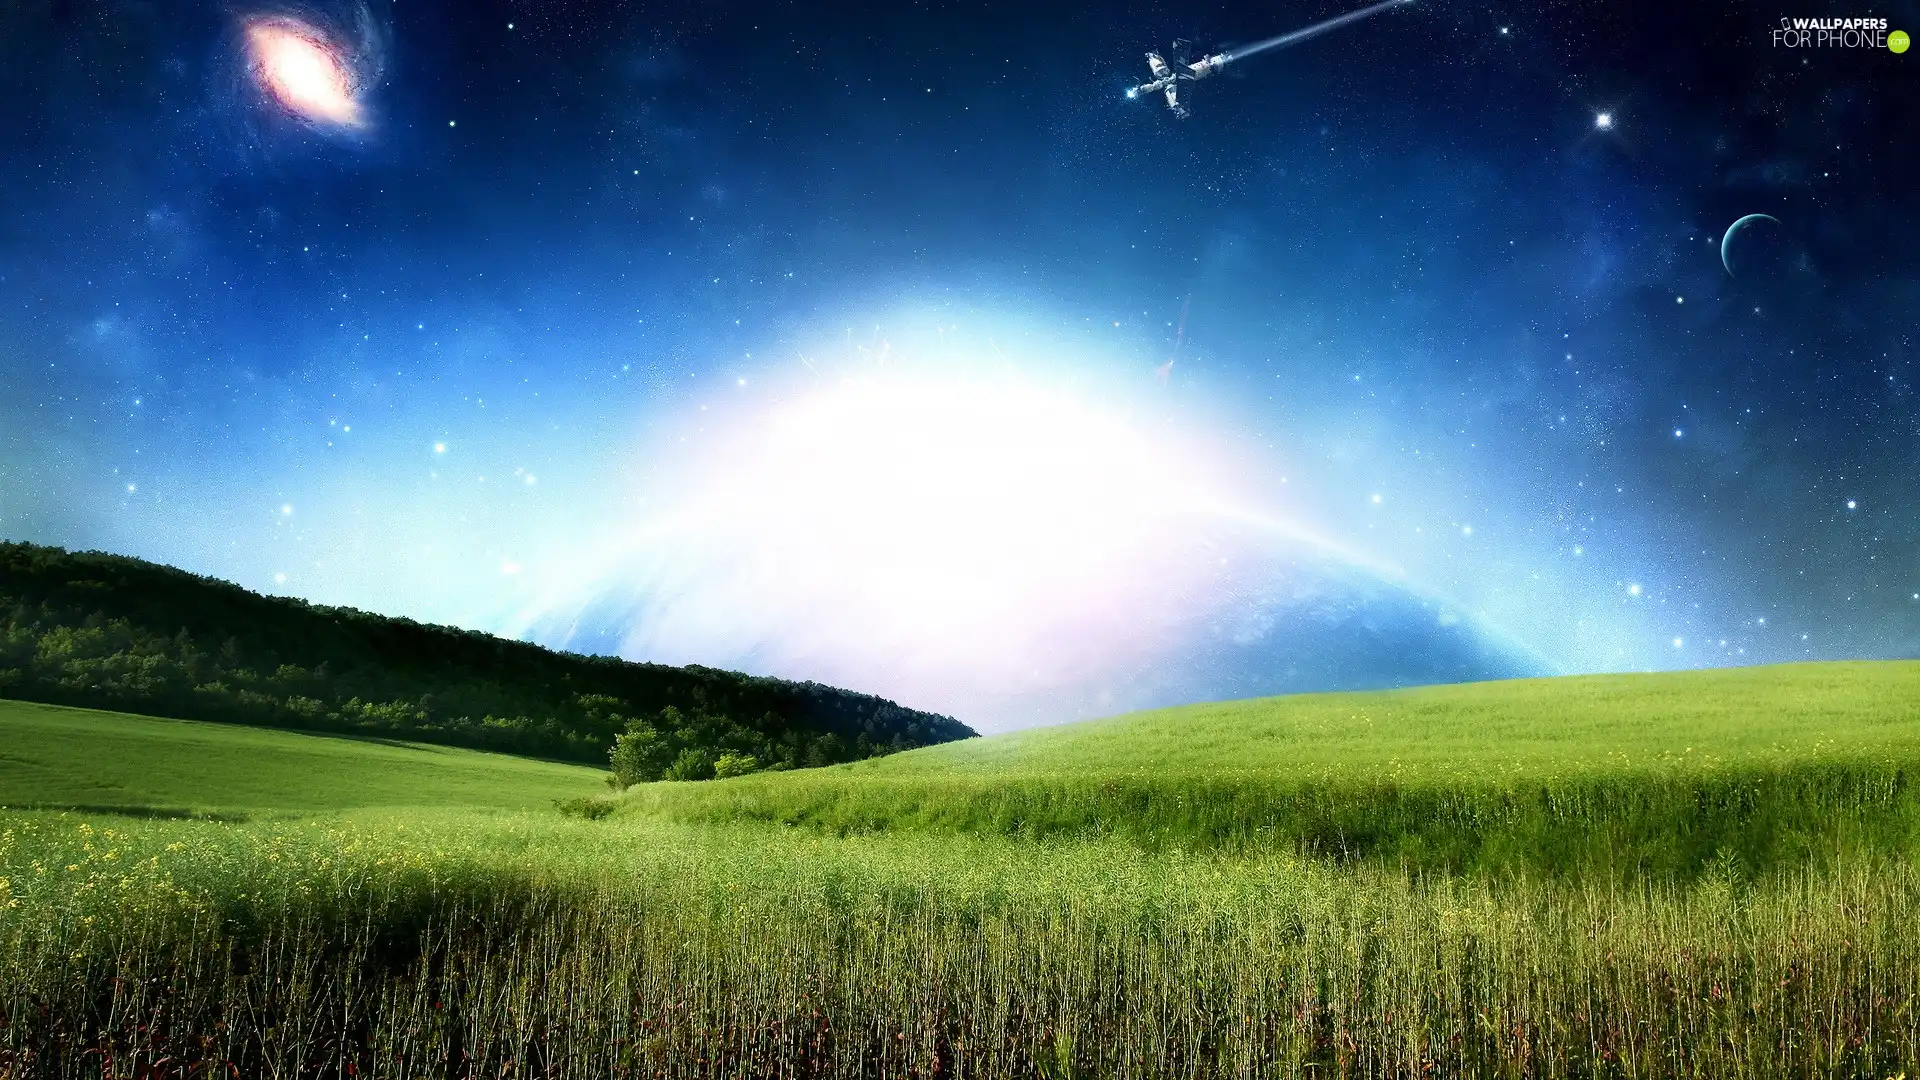 Sky, Field, satellite, star, Planets, forest